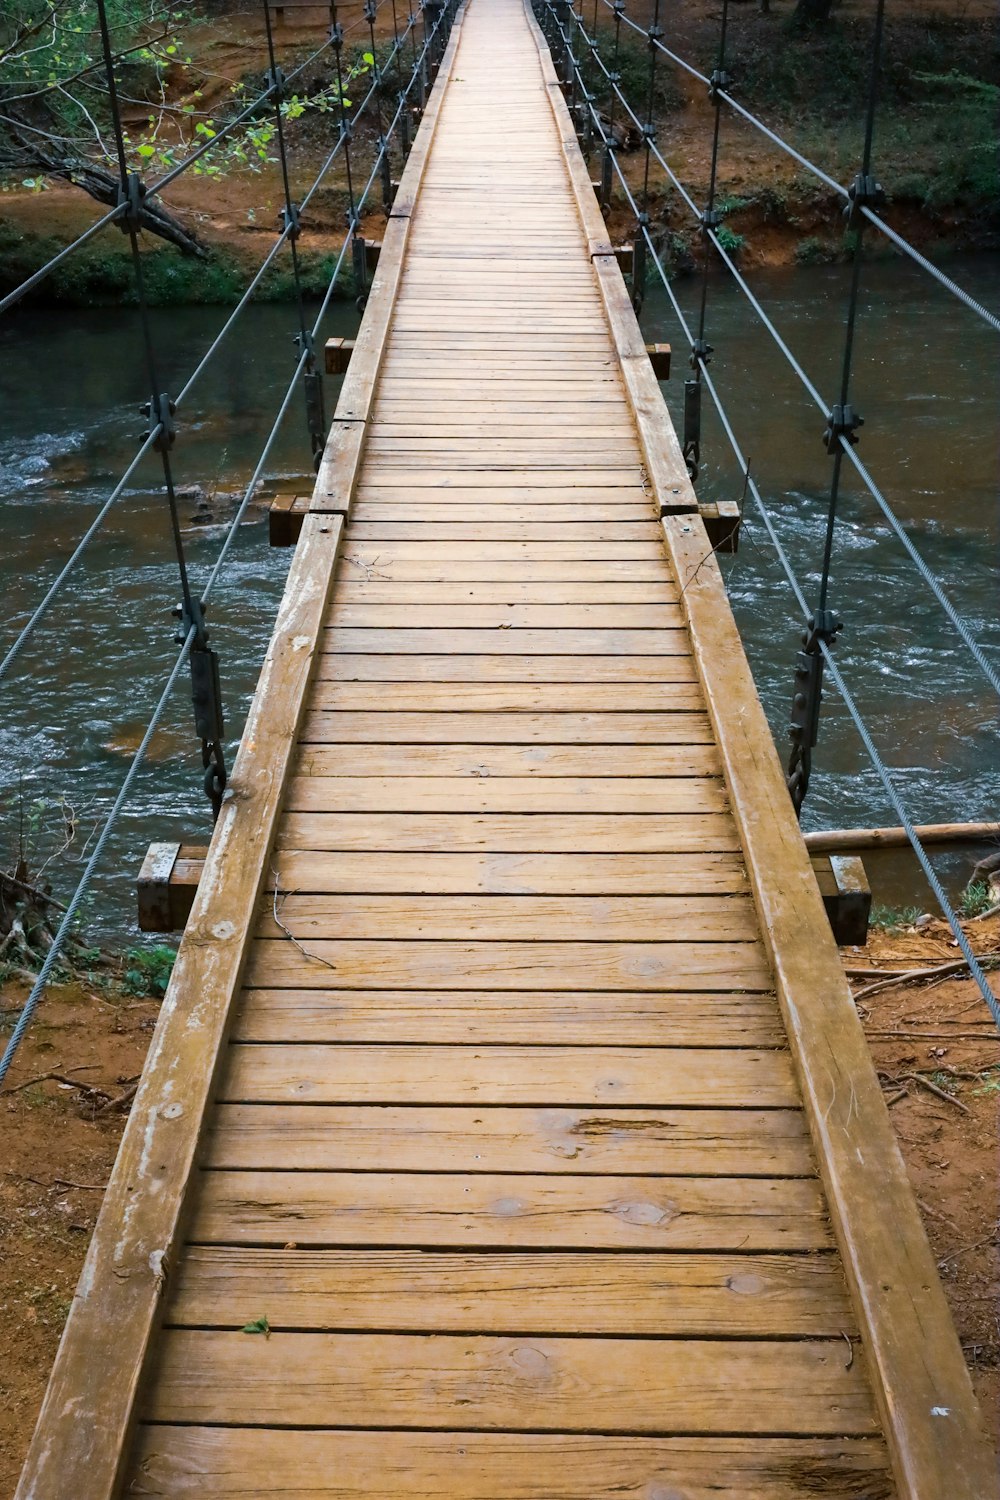 a wooden suspension bridge over a river in the woods